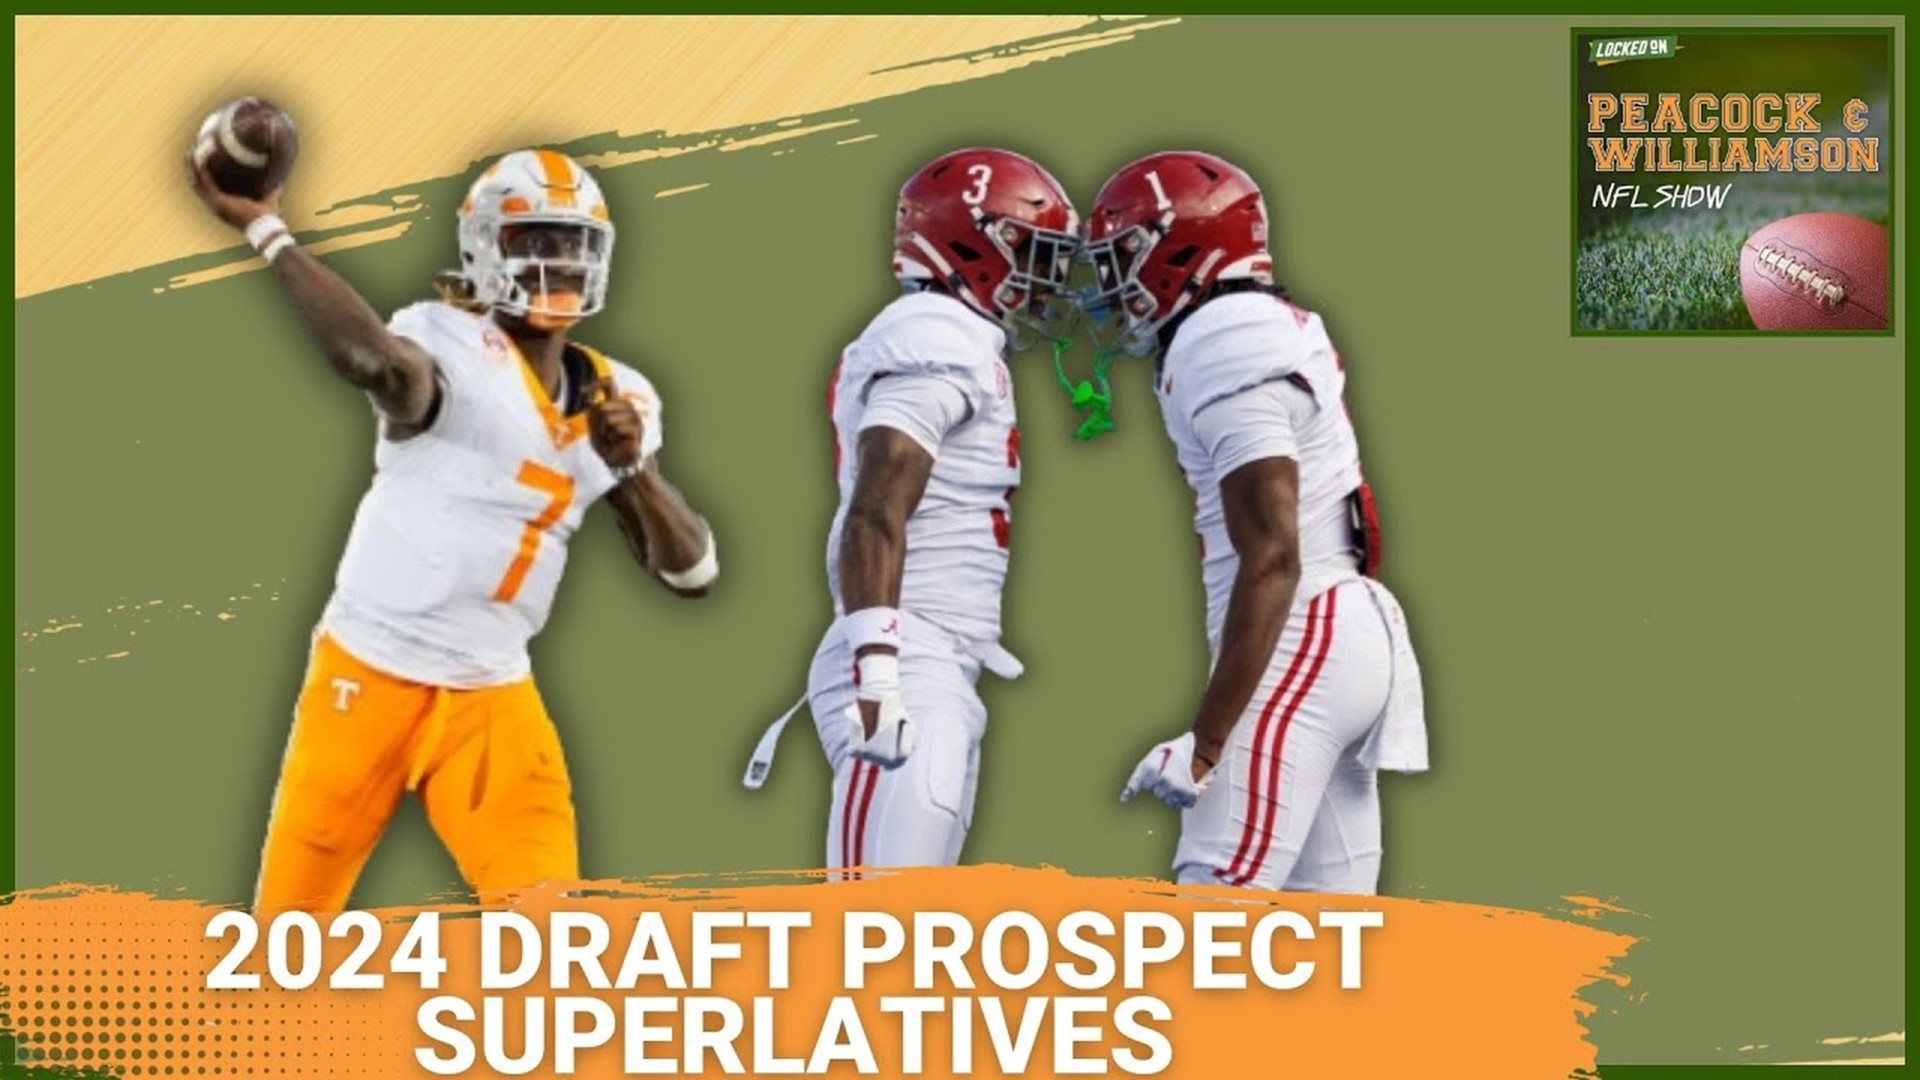 Best arm, most accurate passer, deep ball receiver, press coverage technique and MORE prospect superlatives from Matt Bowen's latest at ESPN.